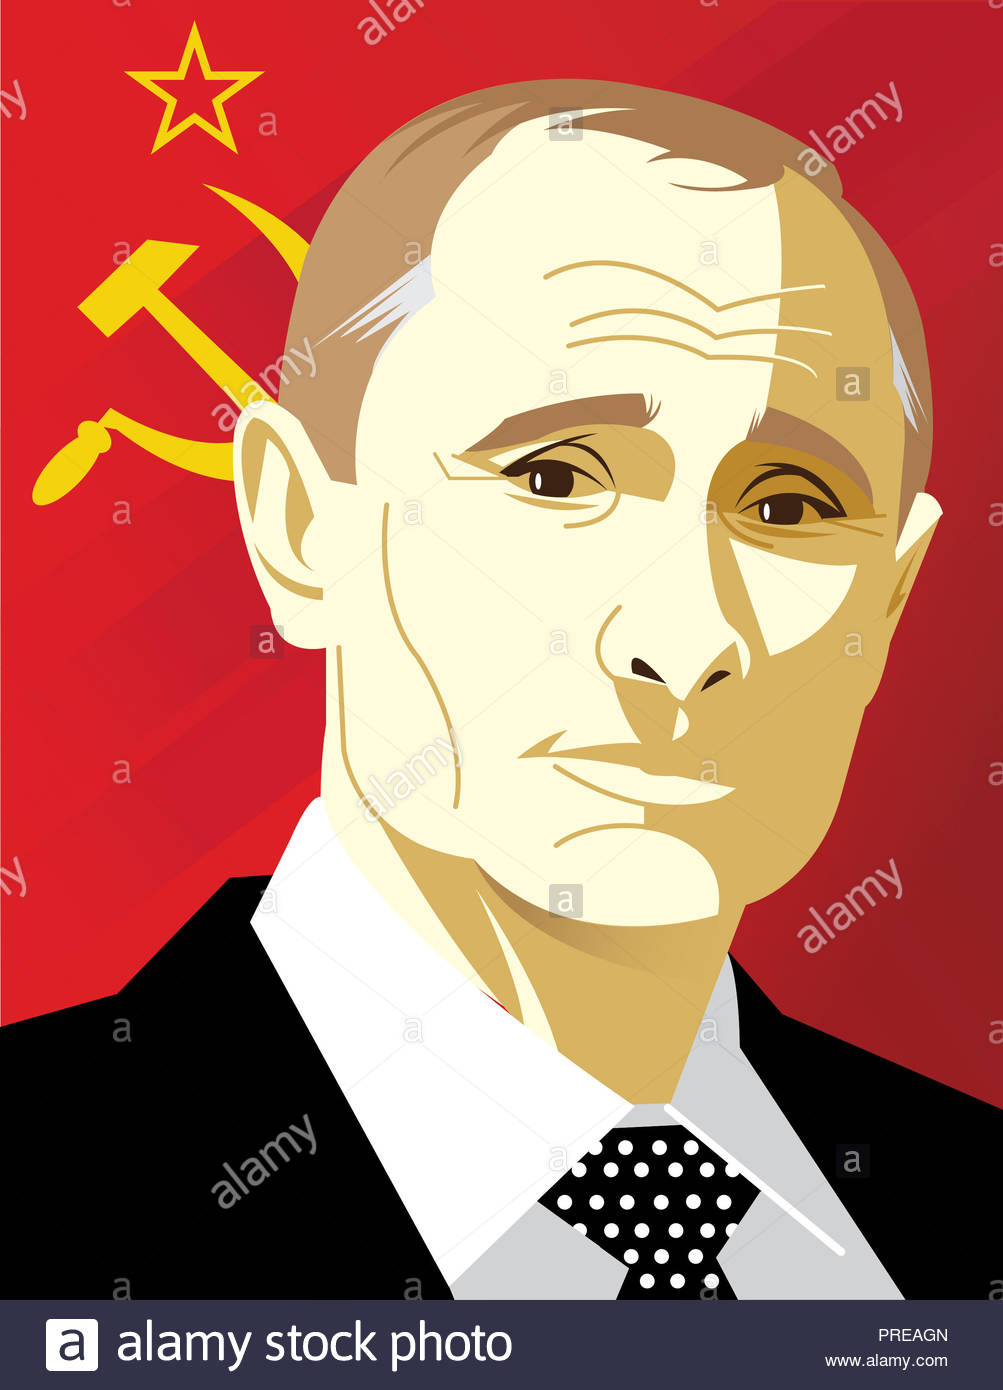 Portrait Of Vladimir Putin With Russian Flag In Background Stock